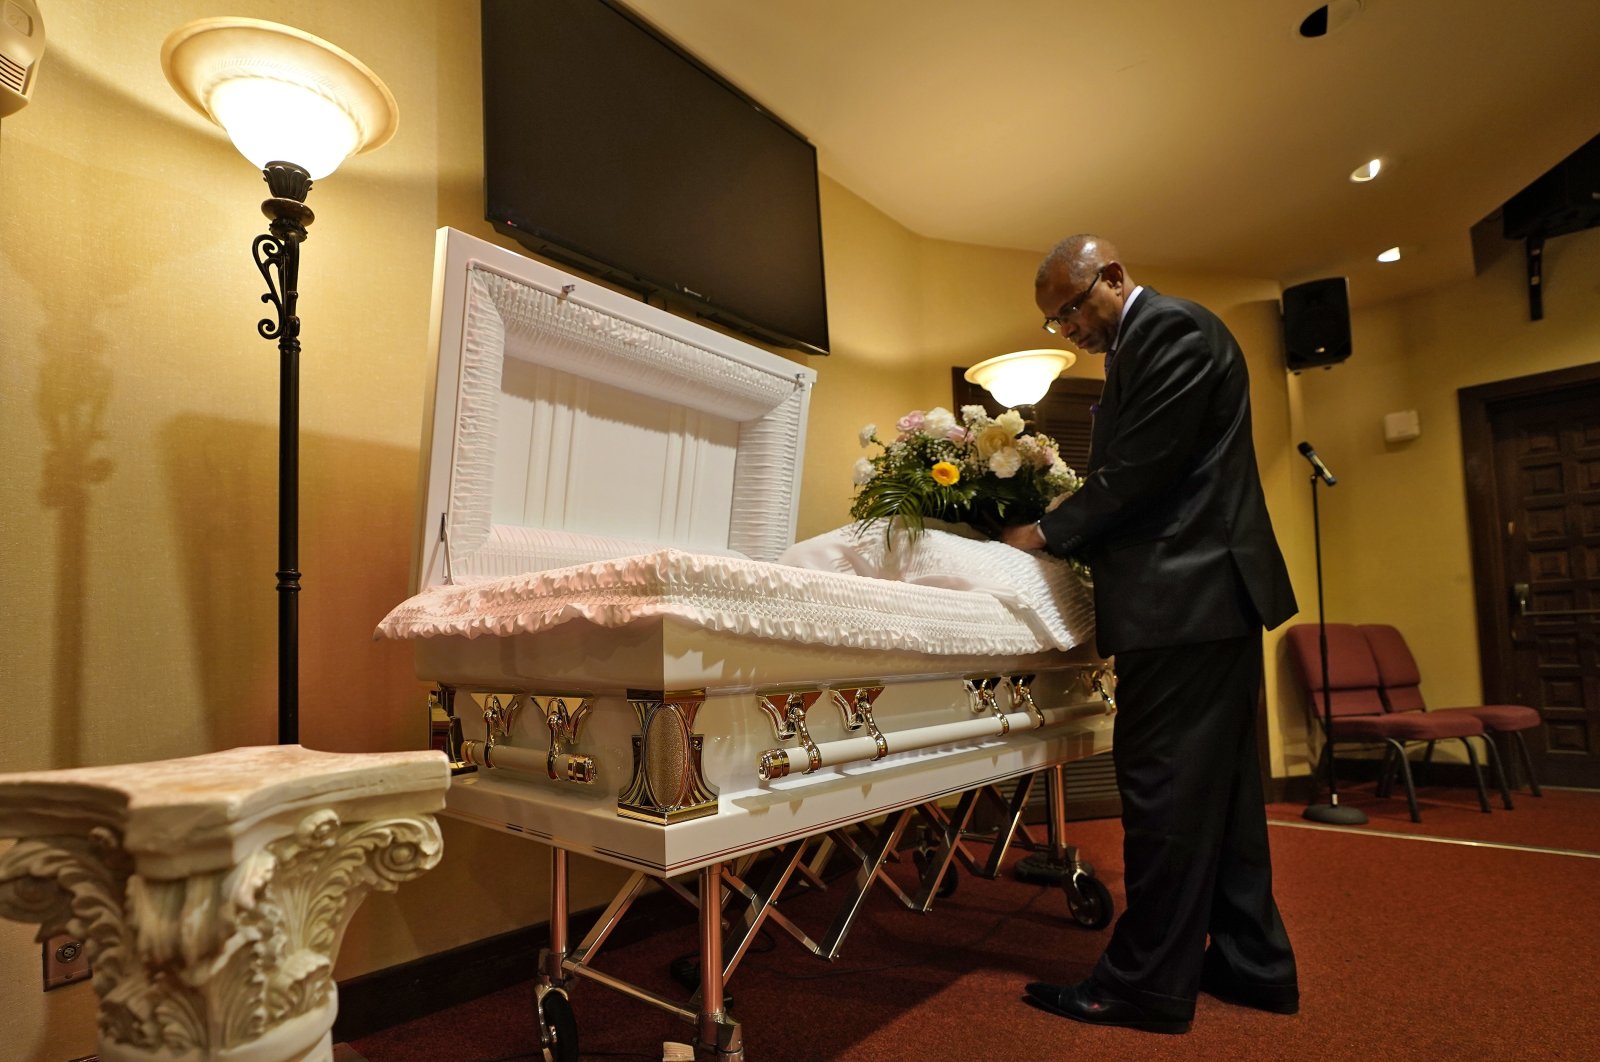 A funeral director arranges flowers on a casket before a service in Tampa, Florida, U.S., Sept. 2, 2021. (AP Photo)